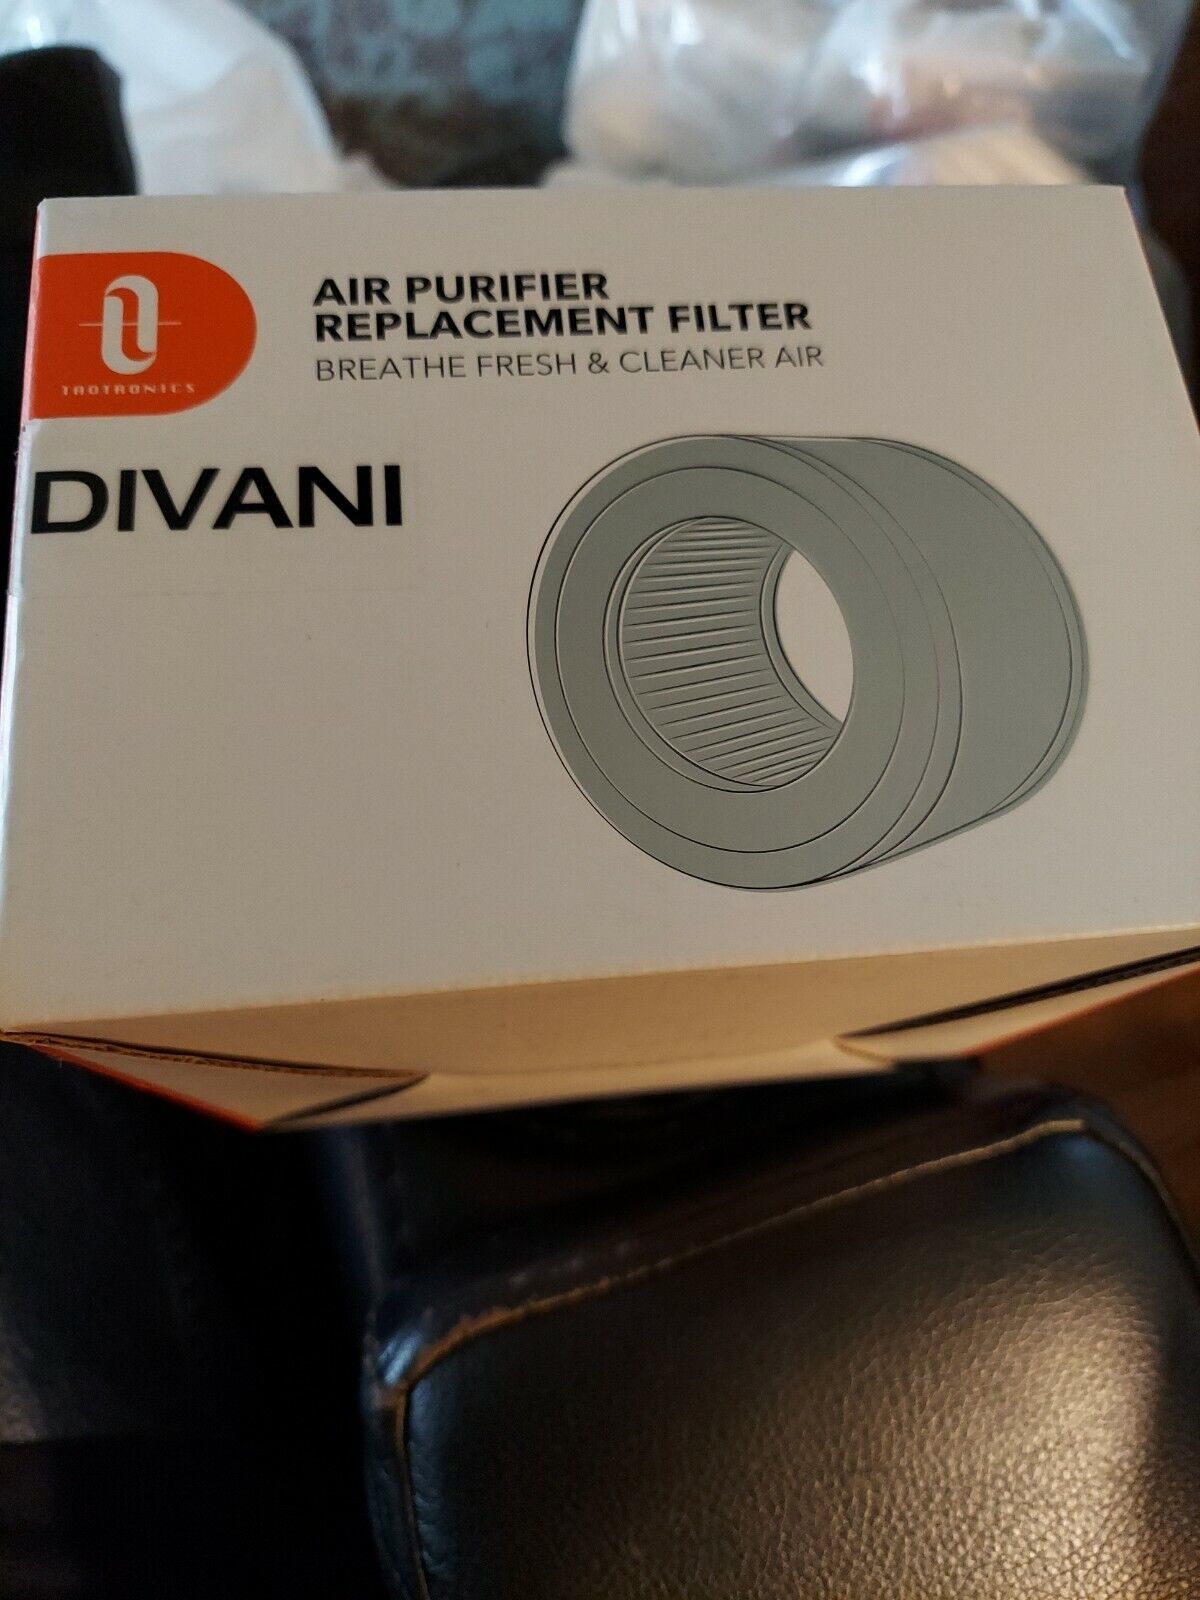 Primary image for Taotronics Divani Air Purifier Replacement Filter